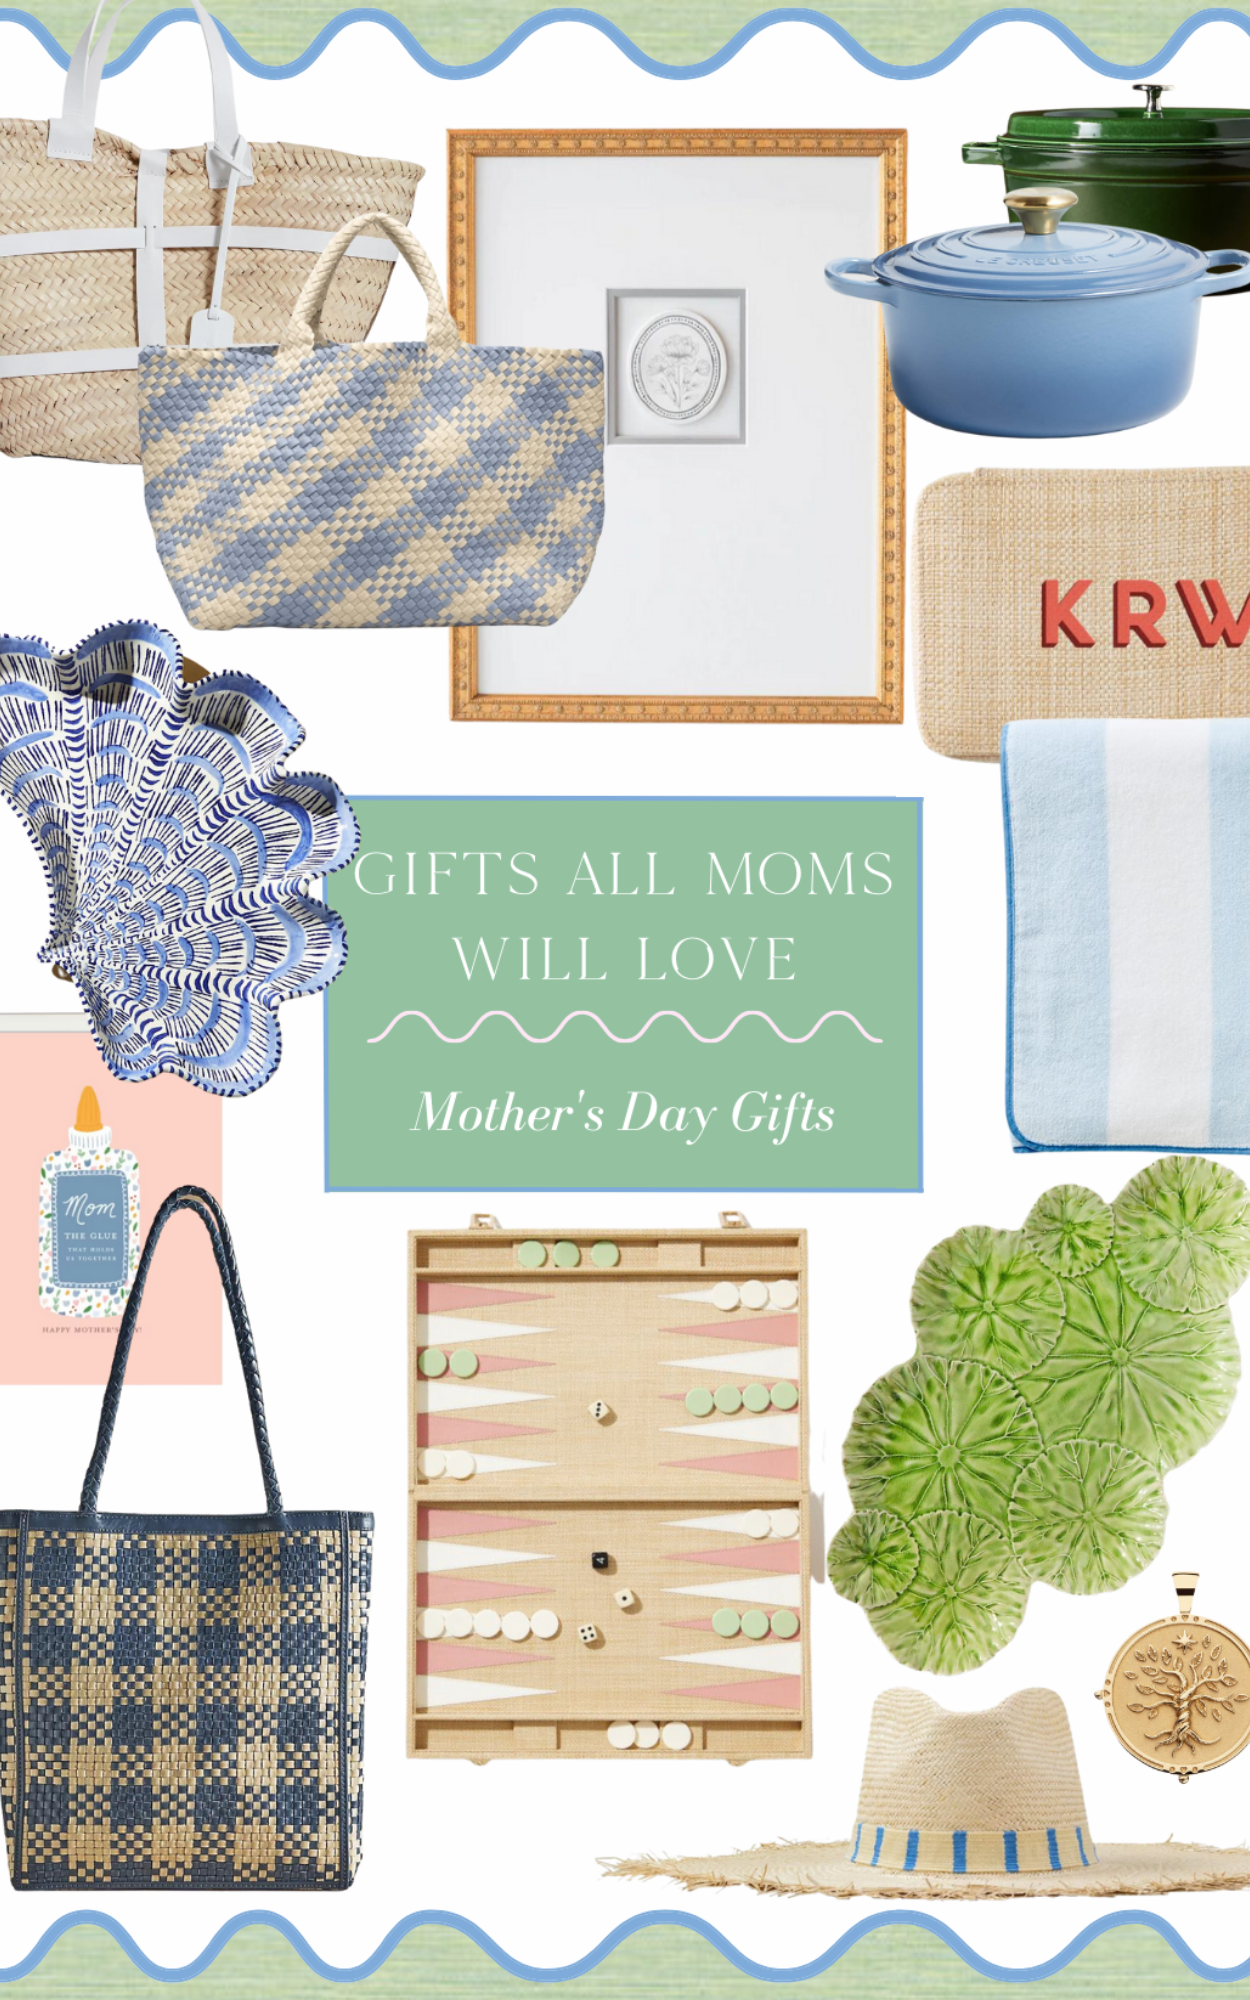 Mother's Day gift ideas 2023, gift ideas for every mom, gifts for mom, luxury gifts for mom, artwork gifts for mom, traditional Mother's Day gifts